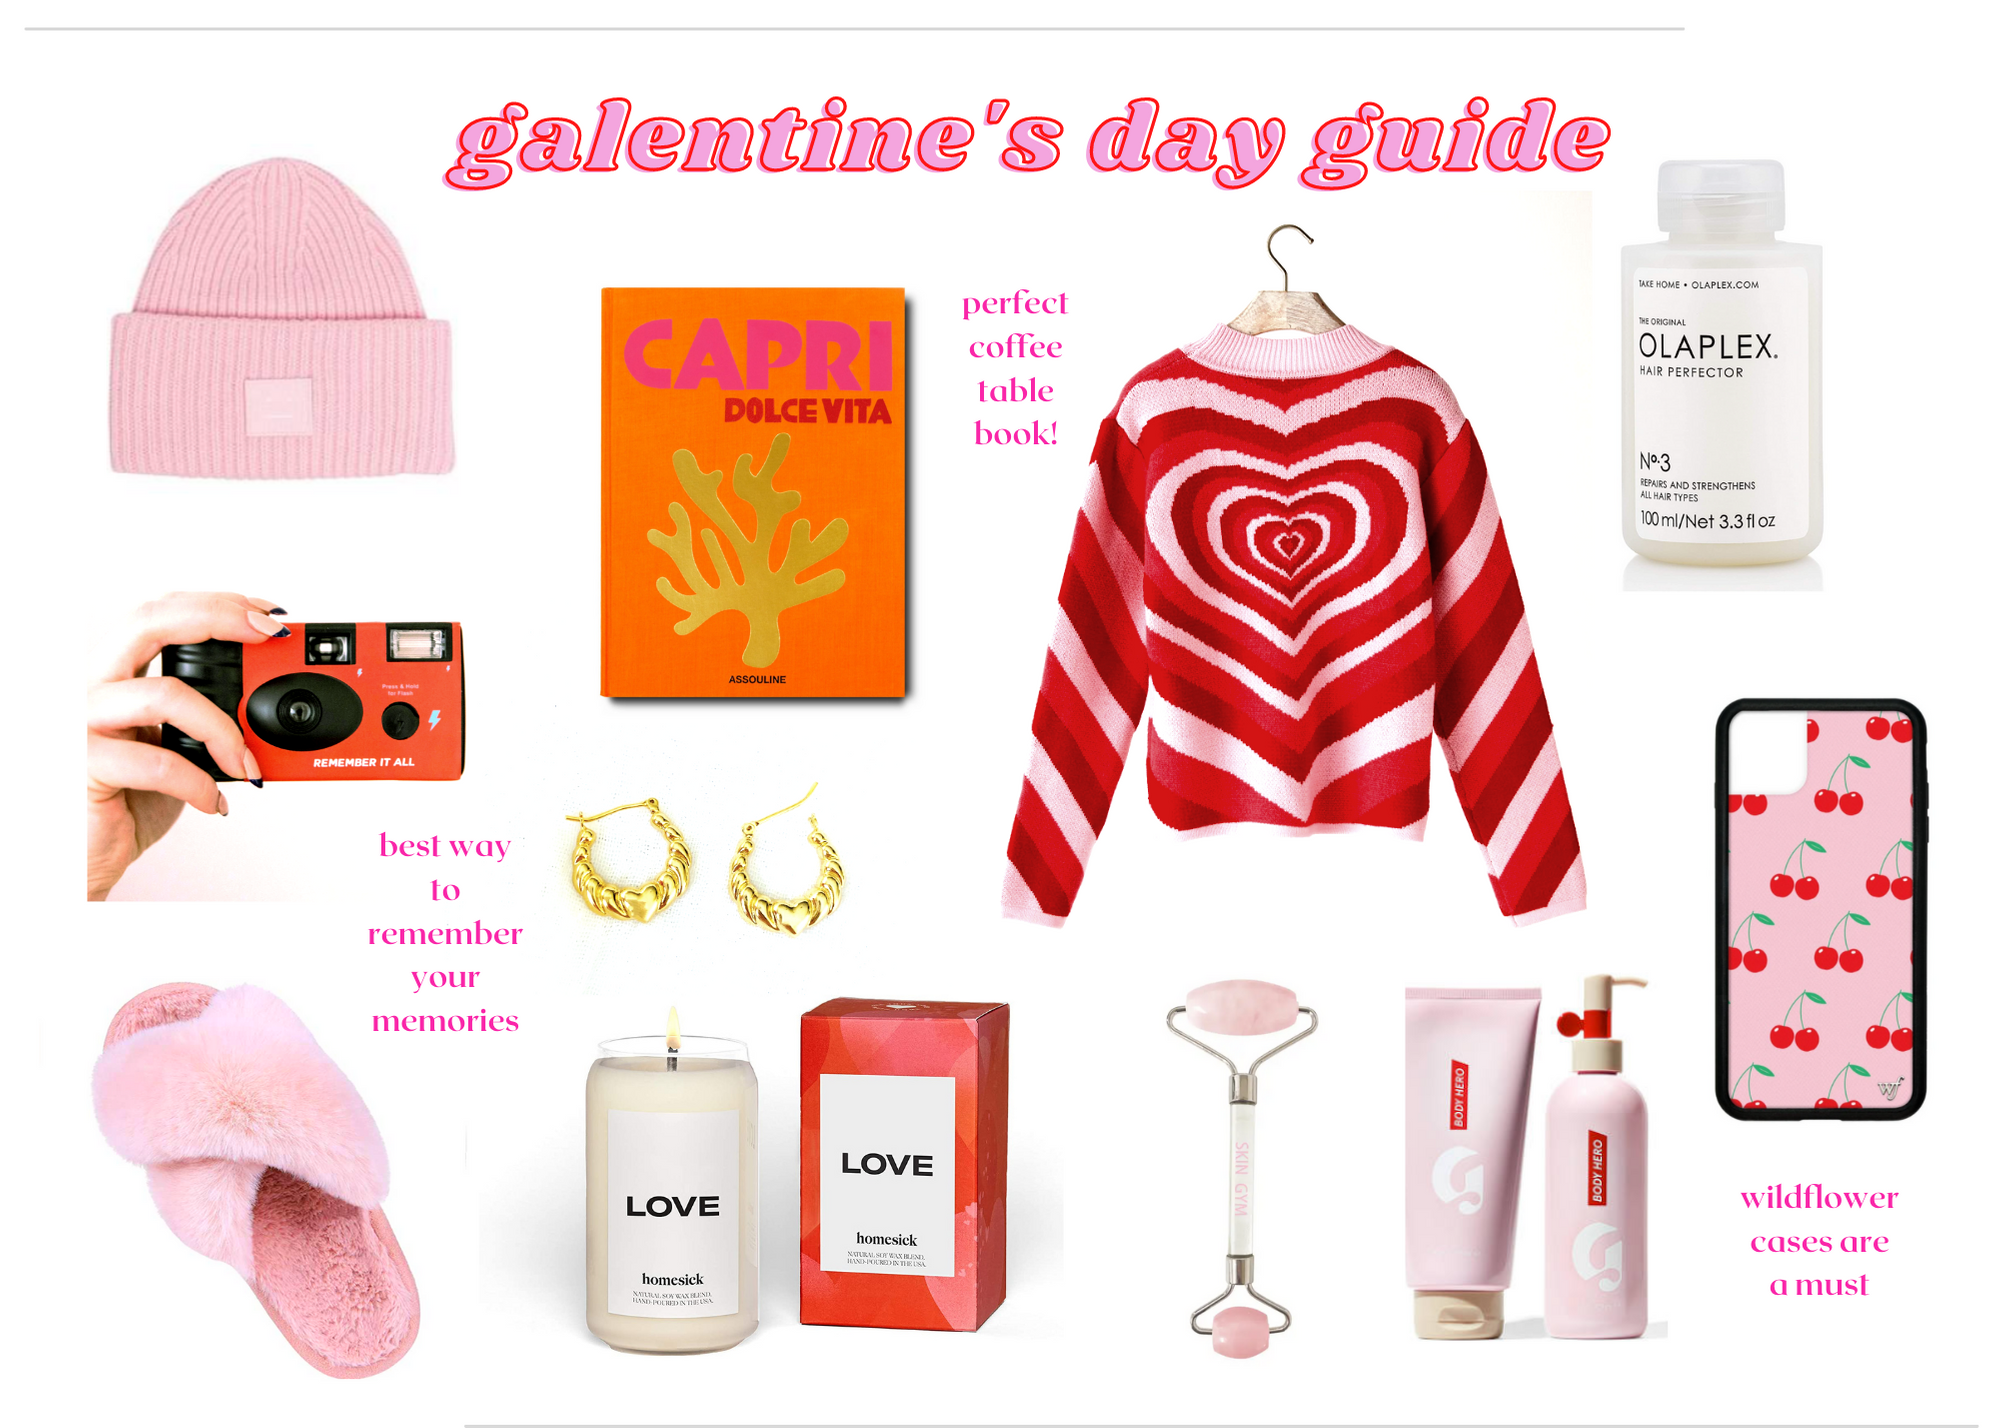 Galentine's Day Gift Guide for 2021